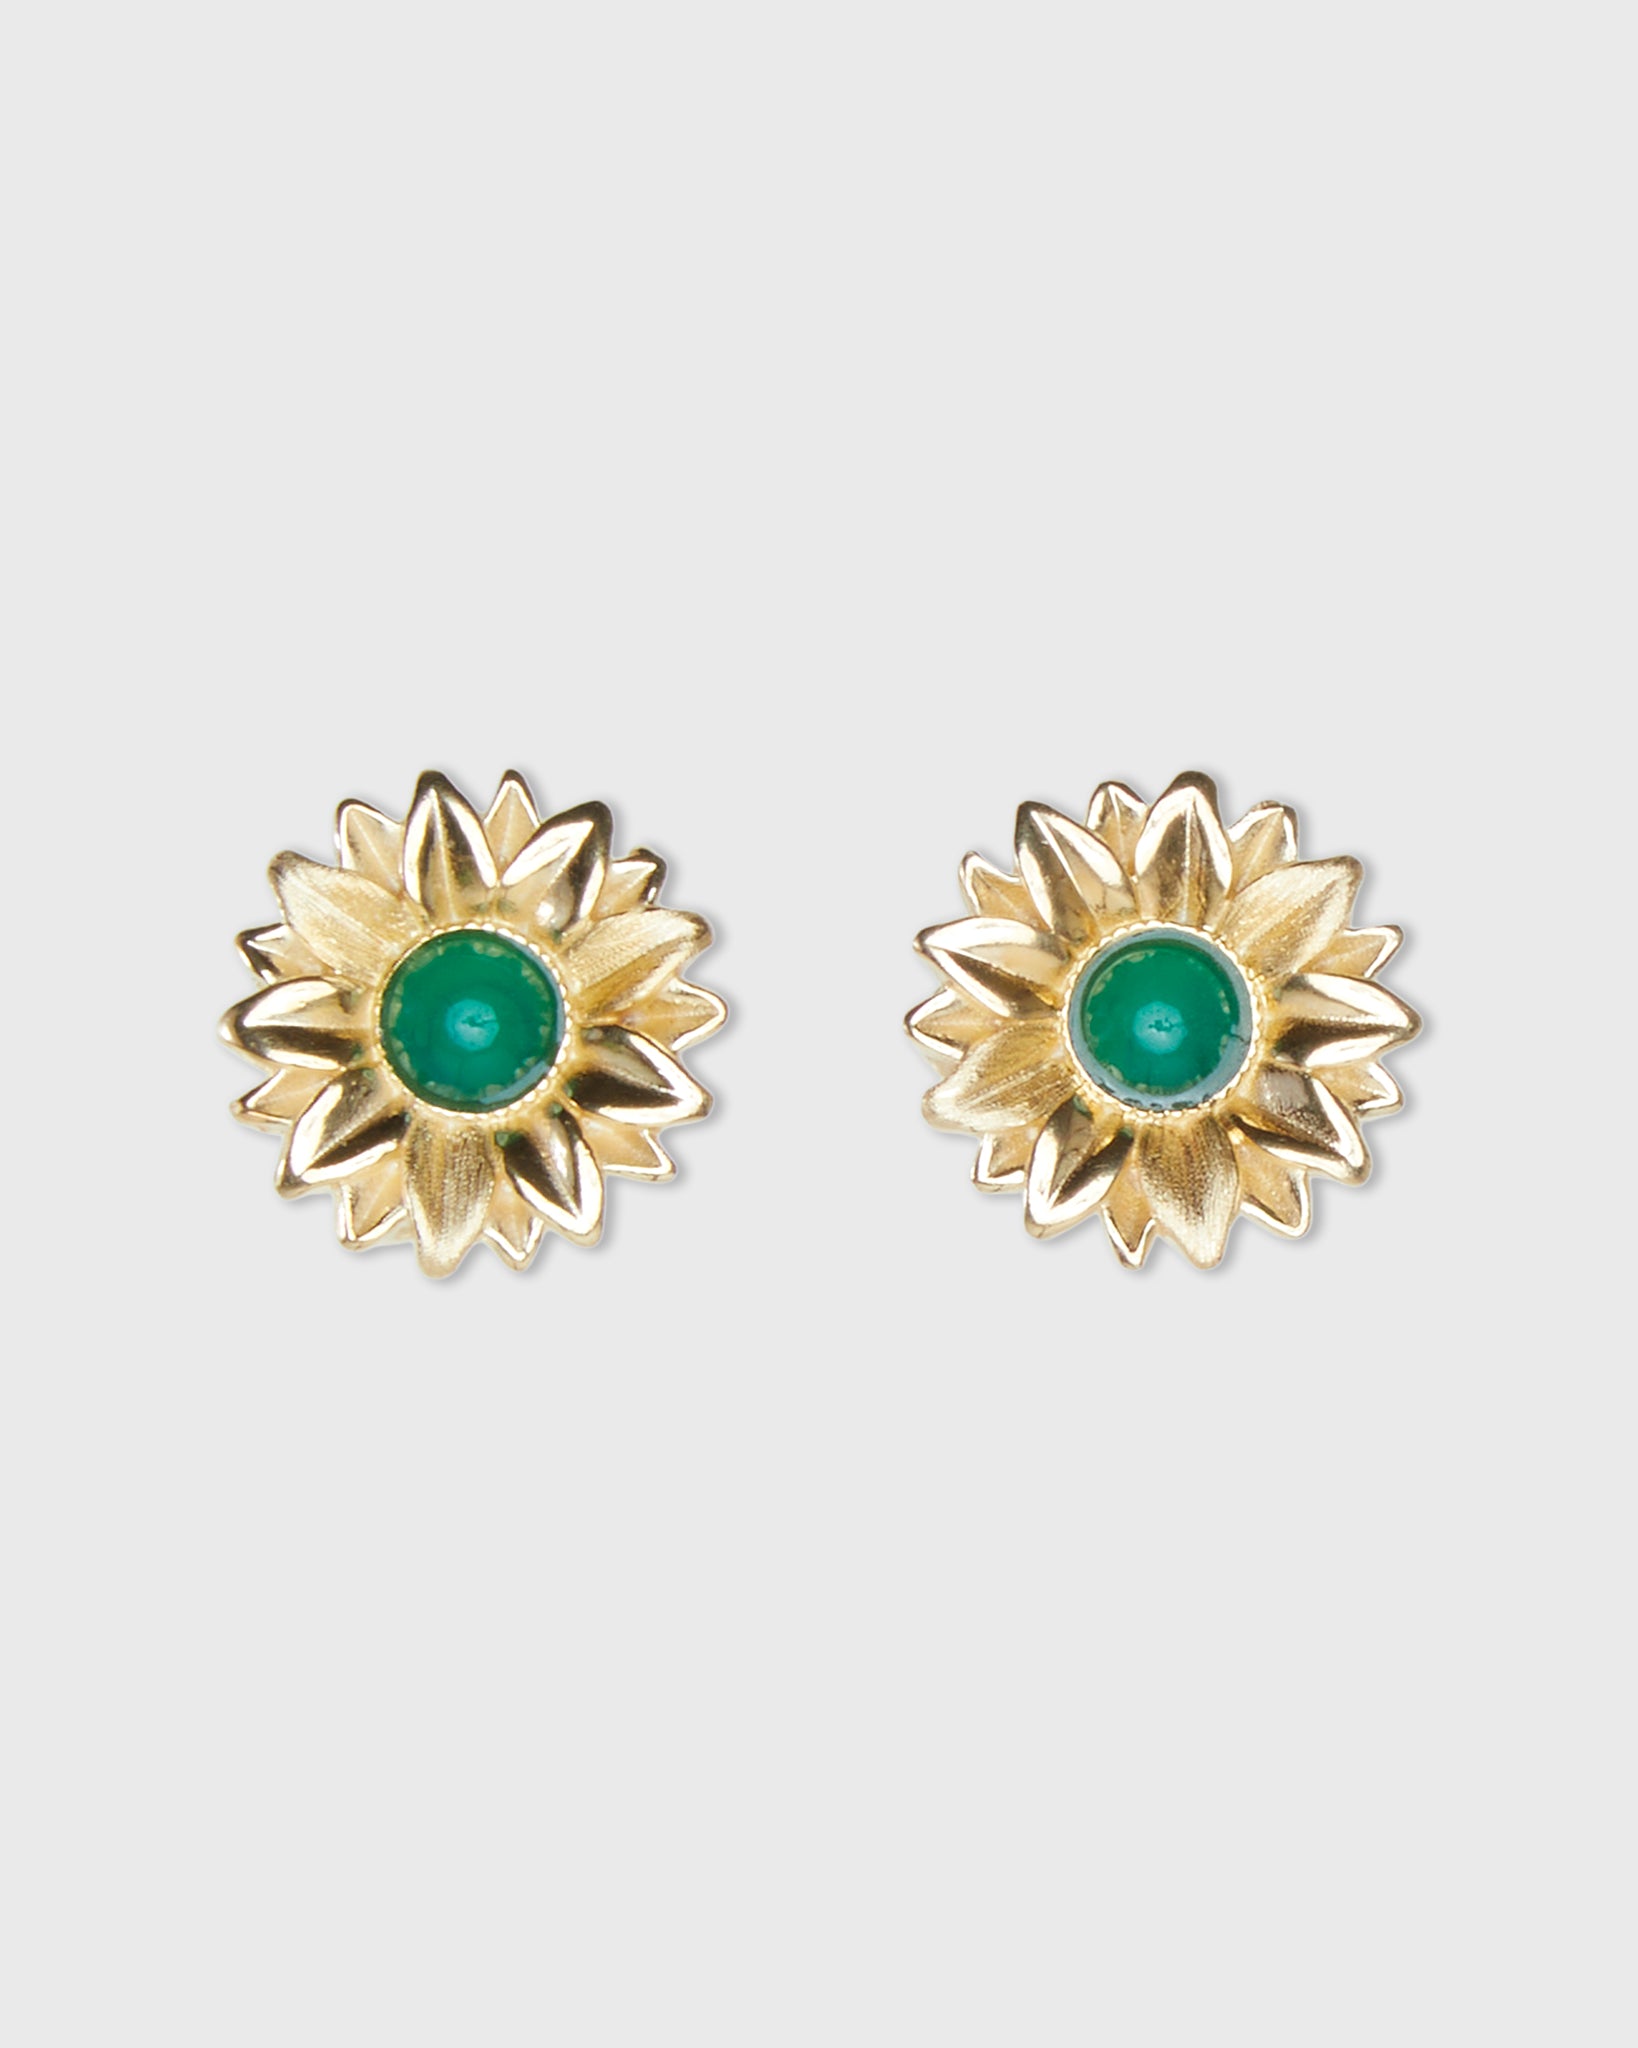 Limoncello Micro Earrings in Gold/Jade